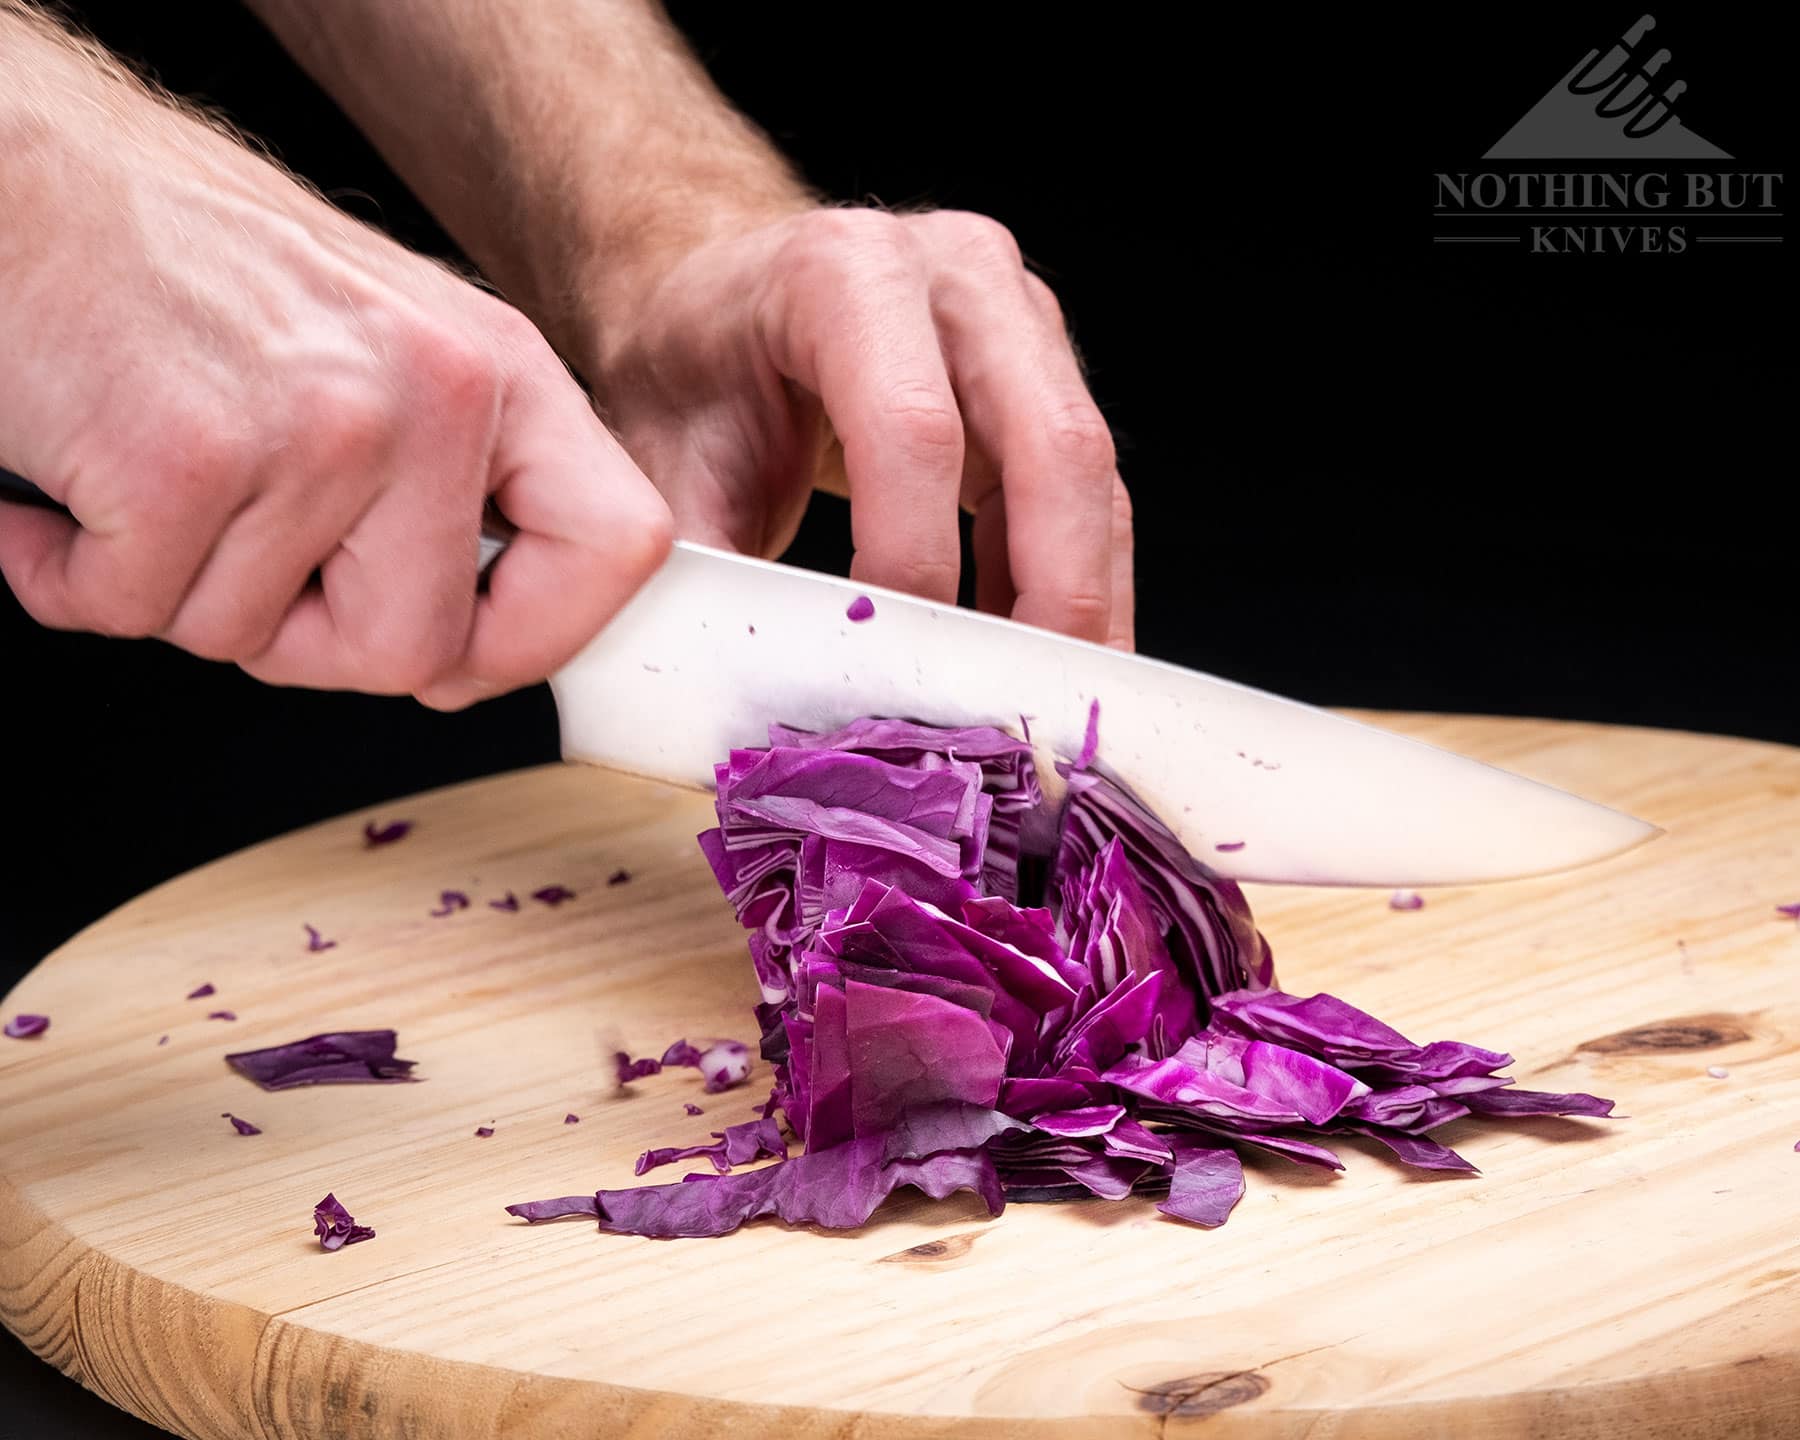 The 8 inch Cangshan TC chef knife chopping a red cabbage on a wood cutting board. 